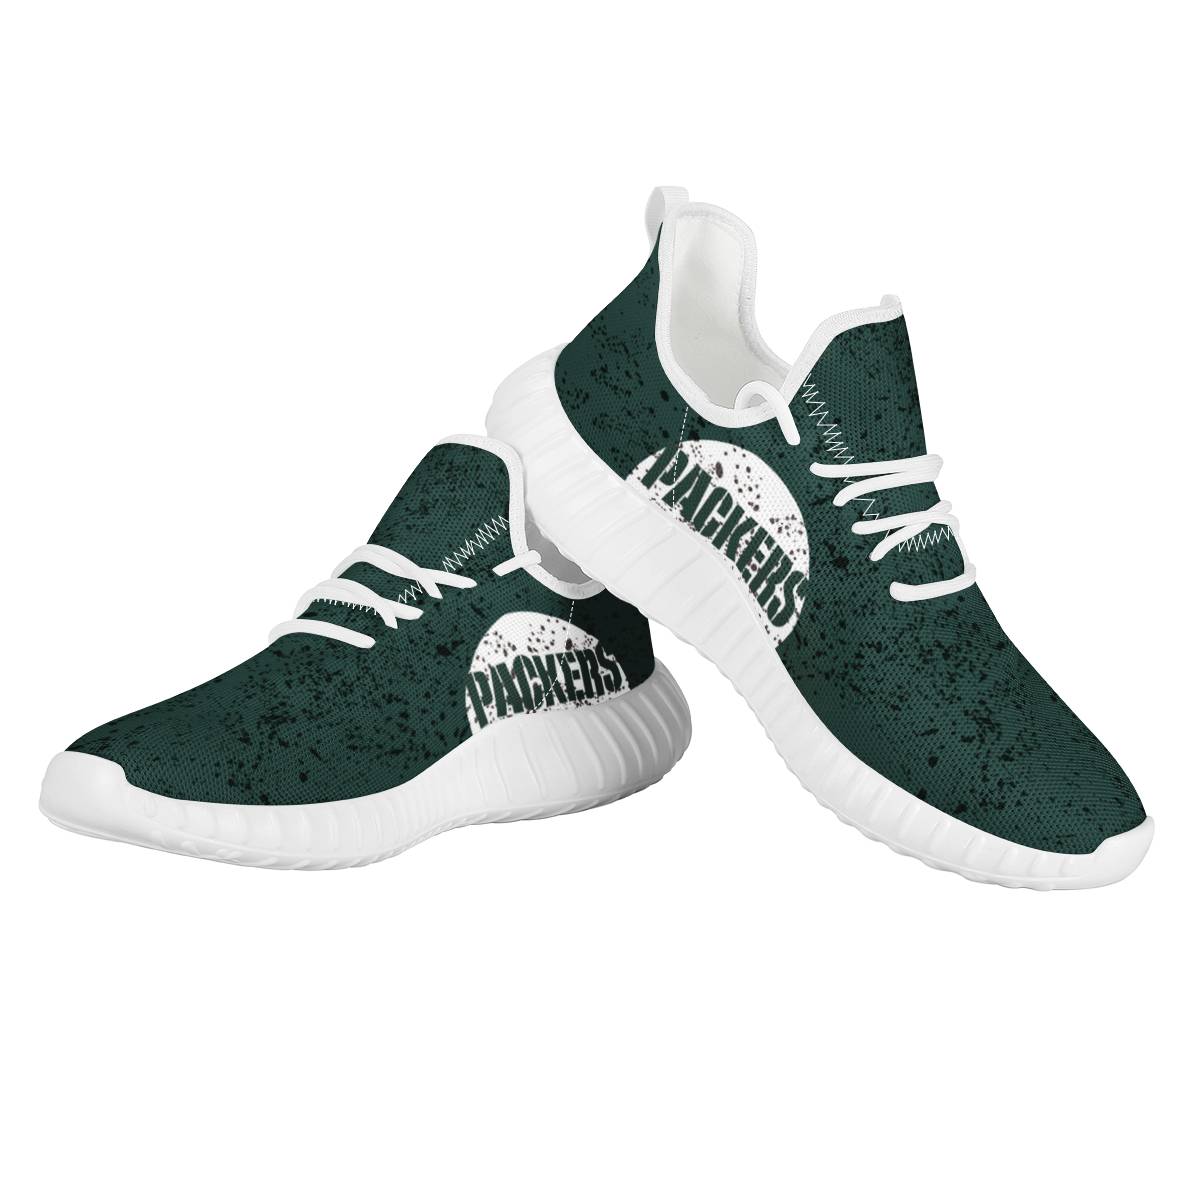 Men's Green Bay Packers Mesh Knit Sneakers/Shoes 001